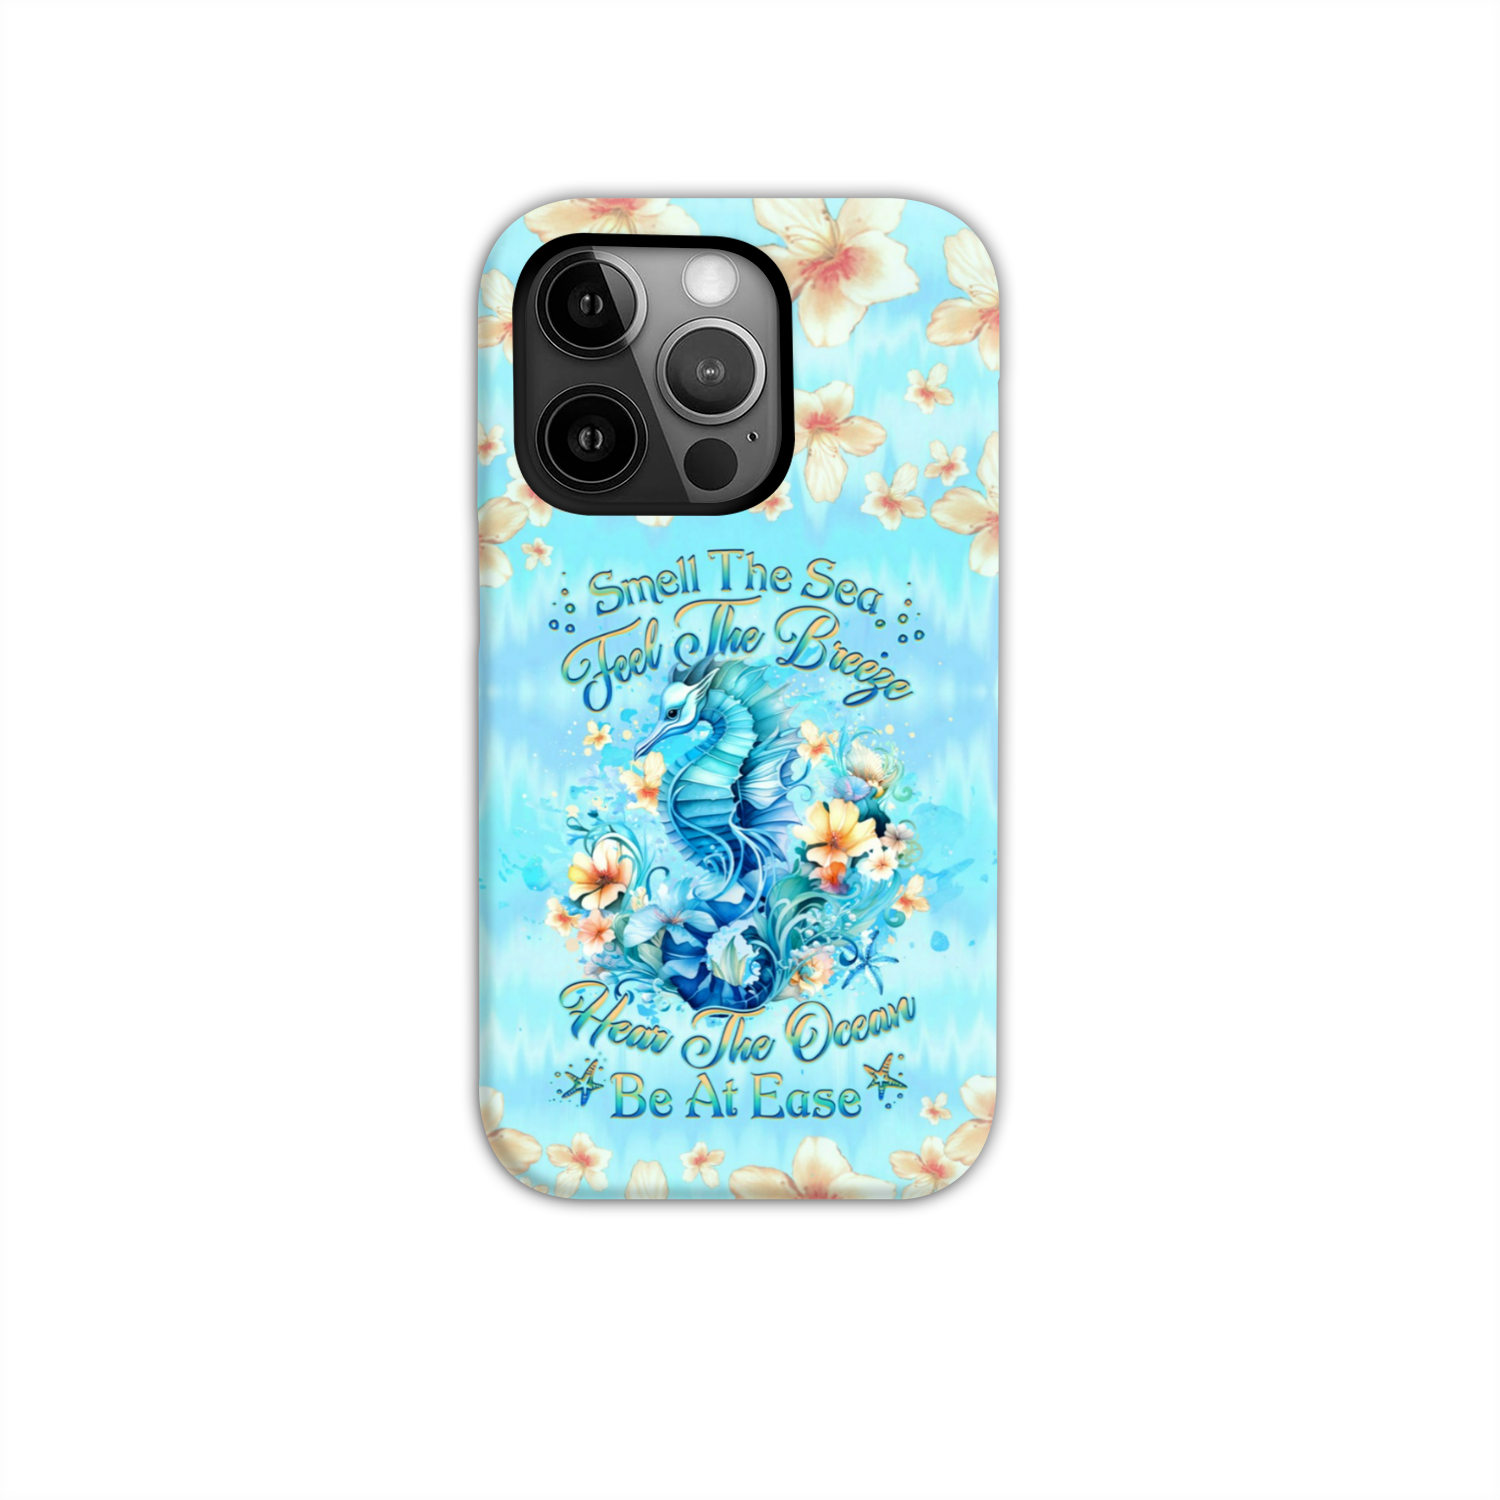 SMELL THE SEA FEEL THE BREEZE SEAHORSE PHONE CASE - YHHG2407234